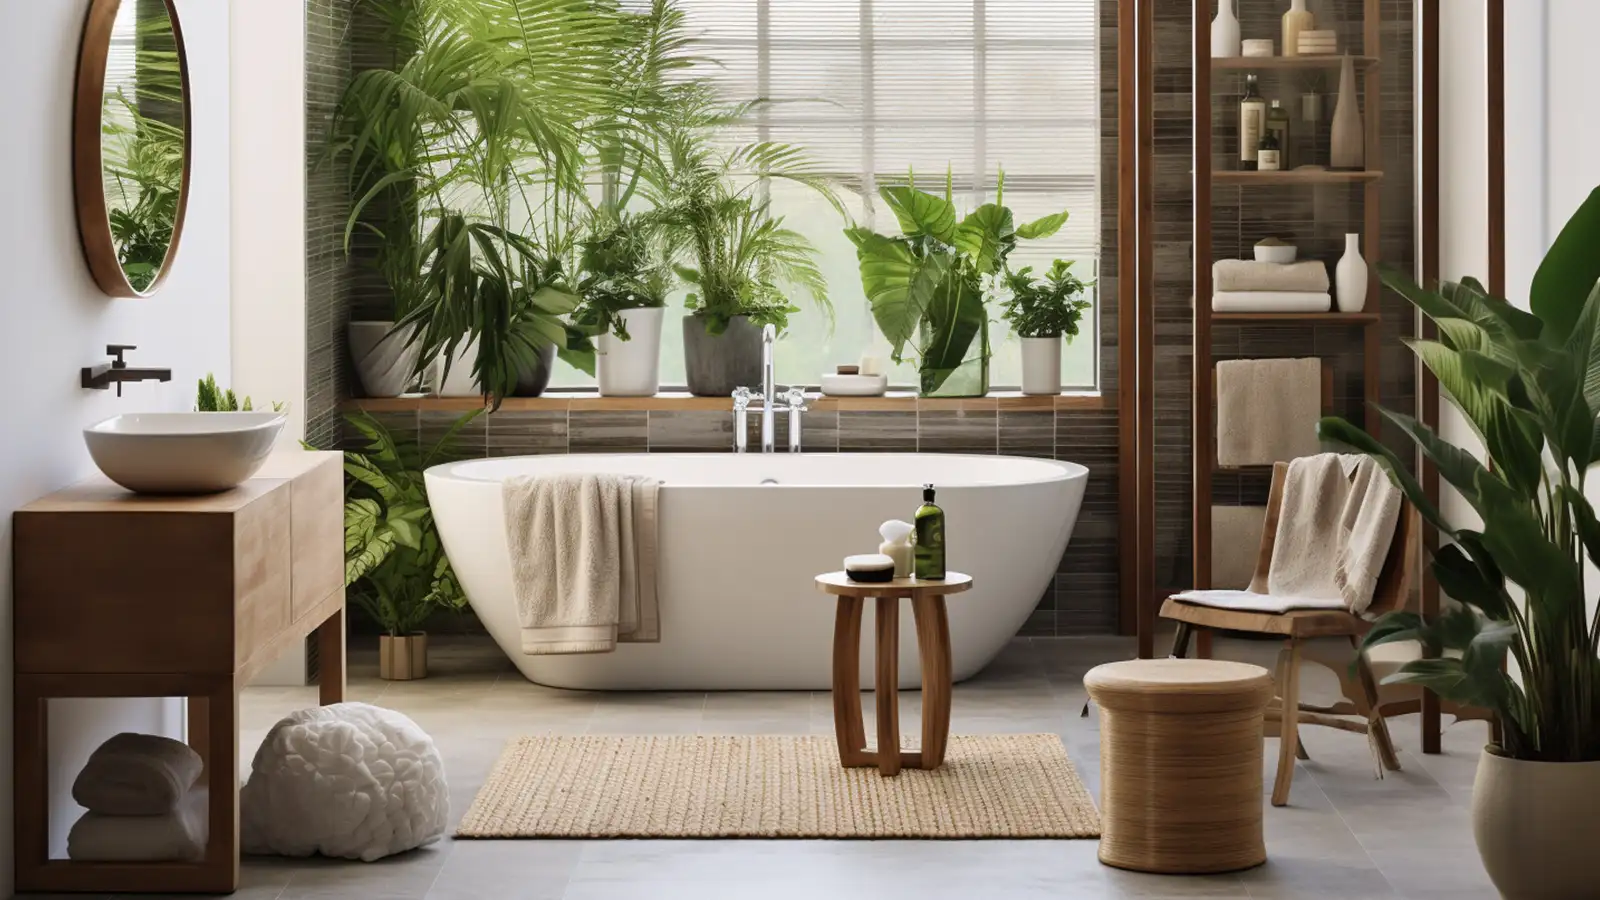 Discover how to decorate an apartment bathroom with an abundance of plants and a luxurious bathtub.